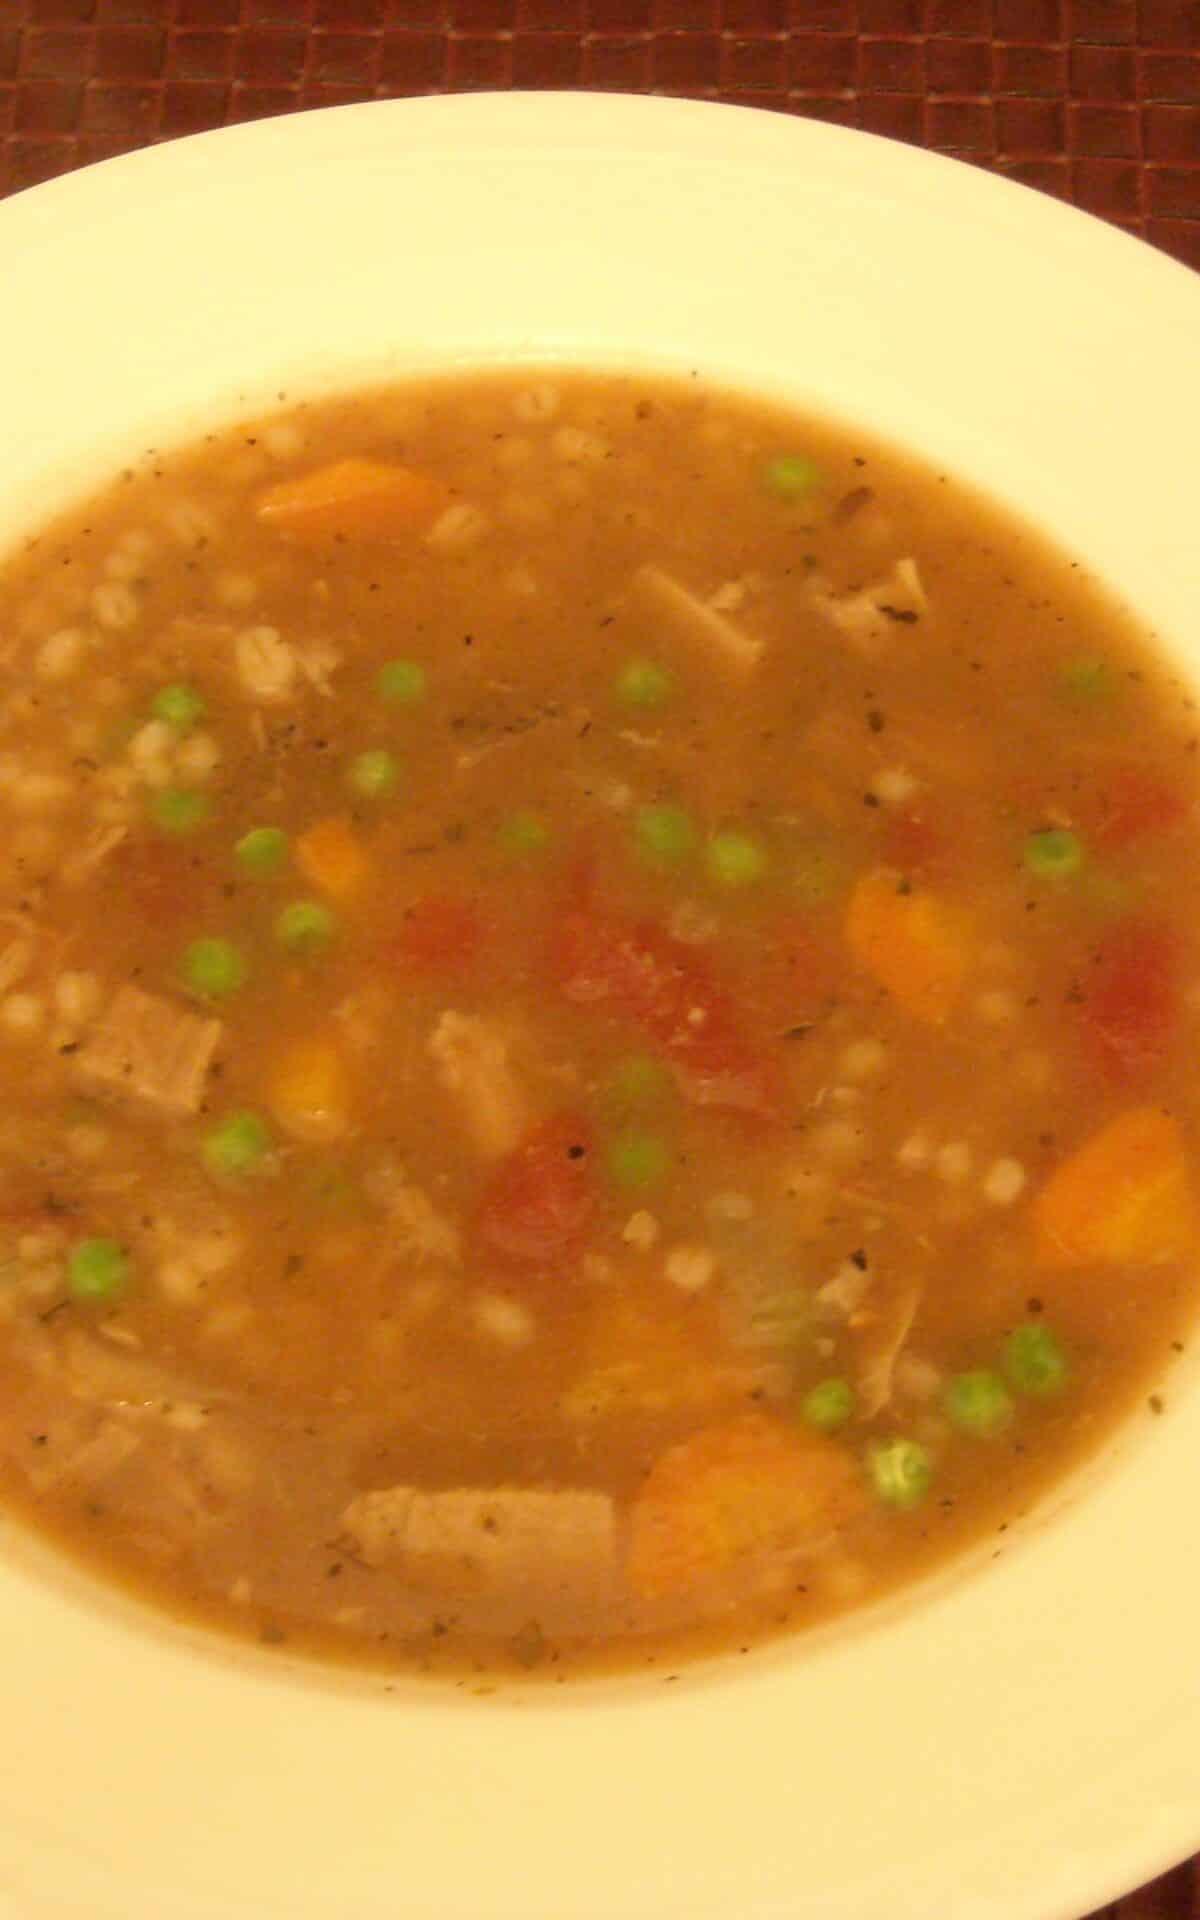  Rich beef broth, tender chunks of meat, and nutty barley come together in this hearty soup.